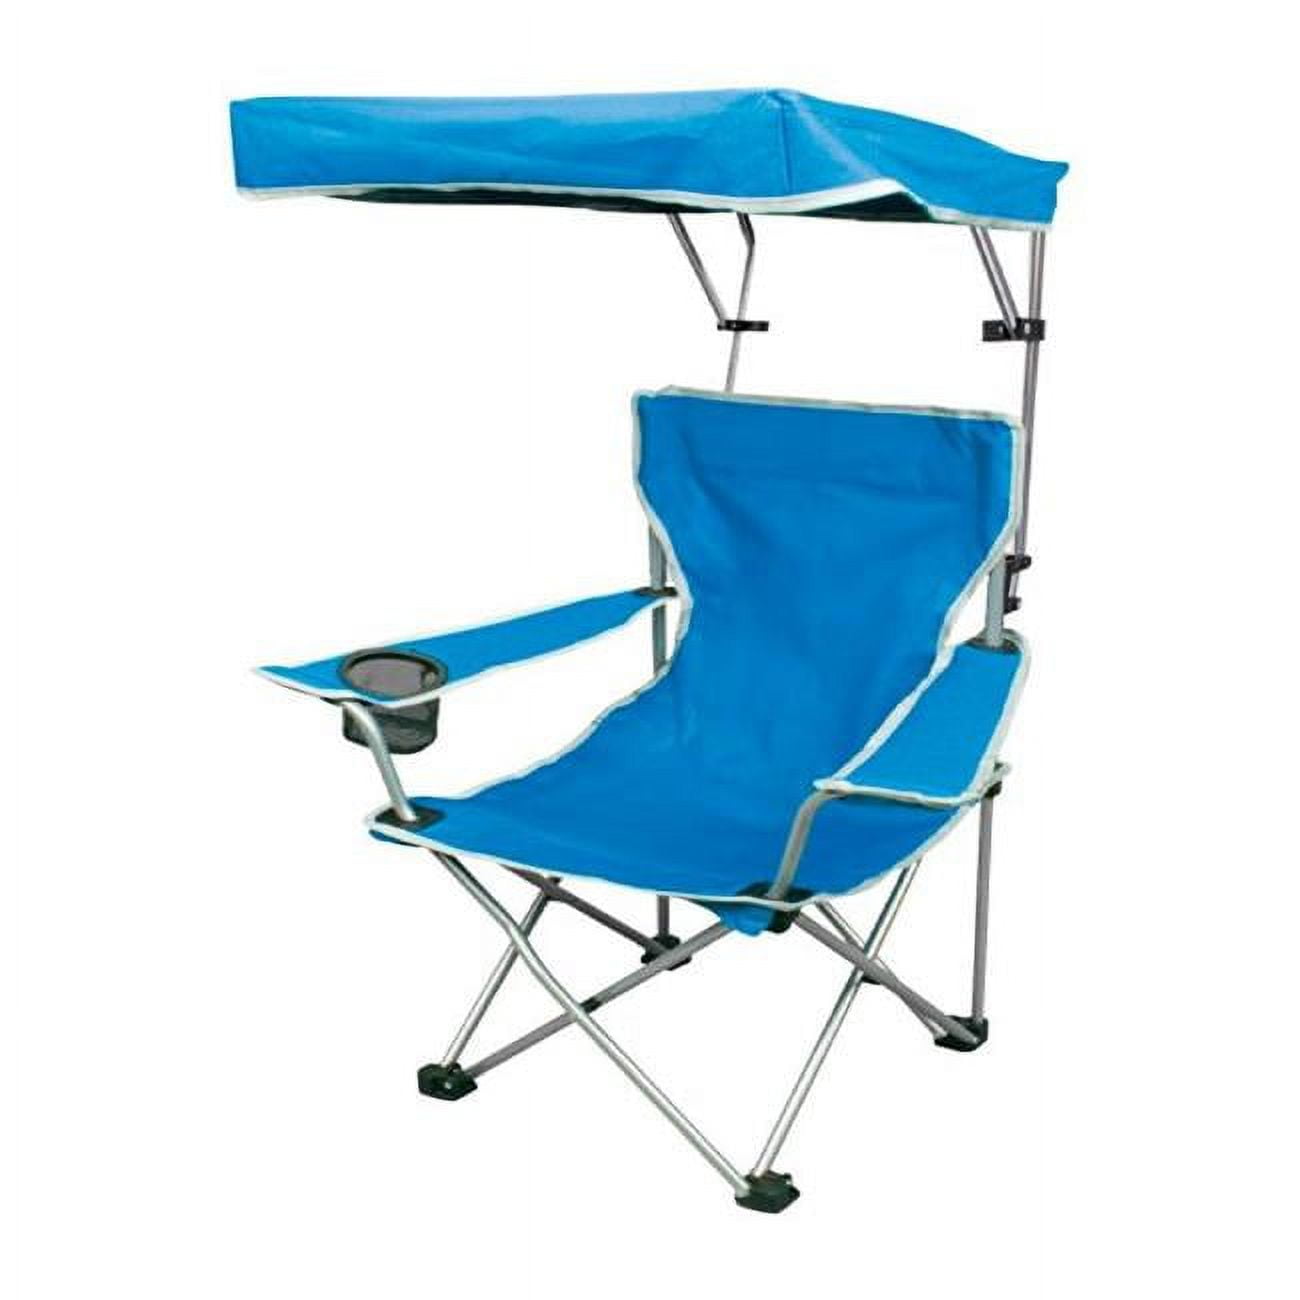 8015822 37 In. Adjustable Blue Canopy Folding Kids Chair